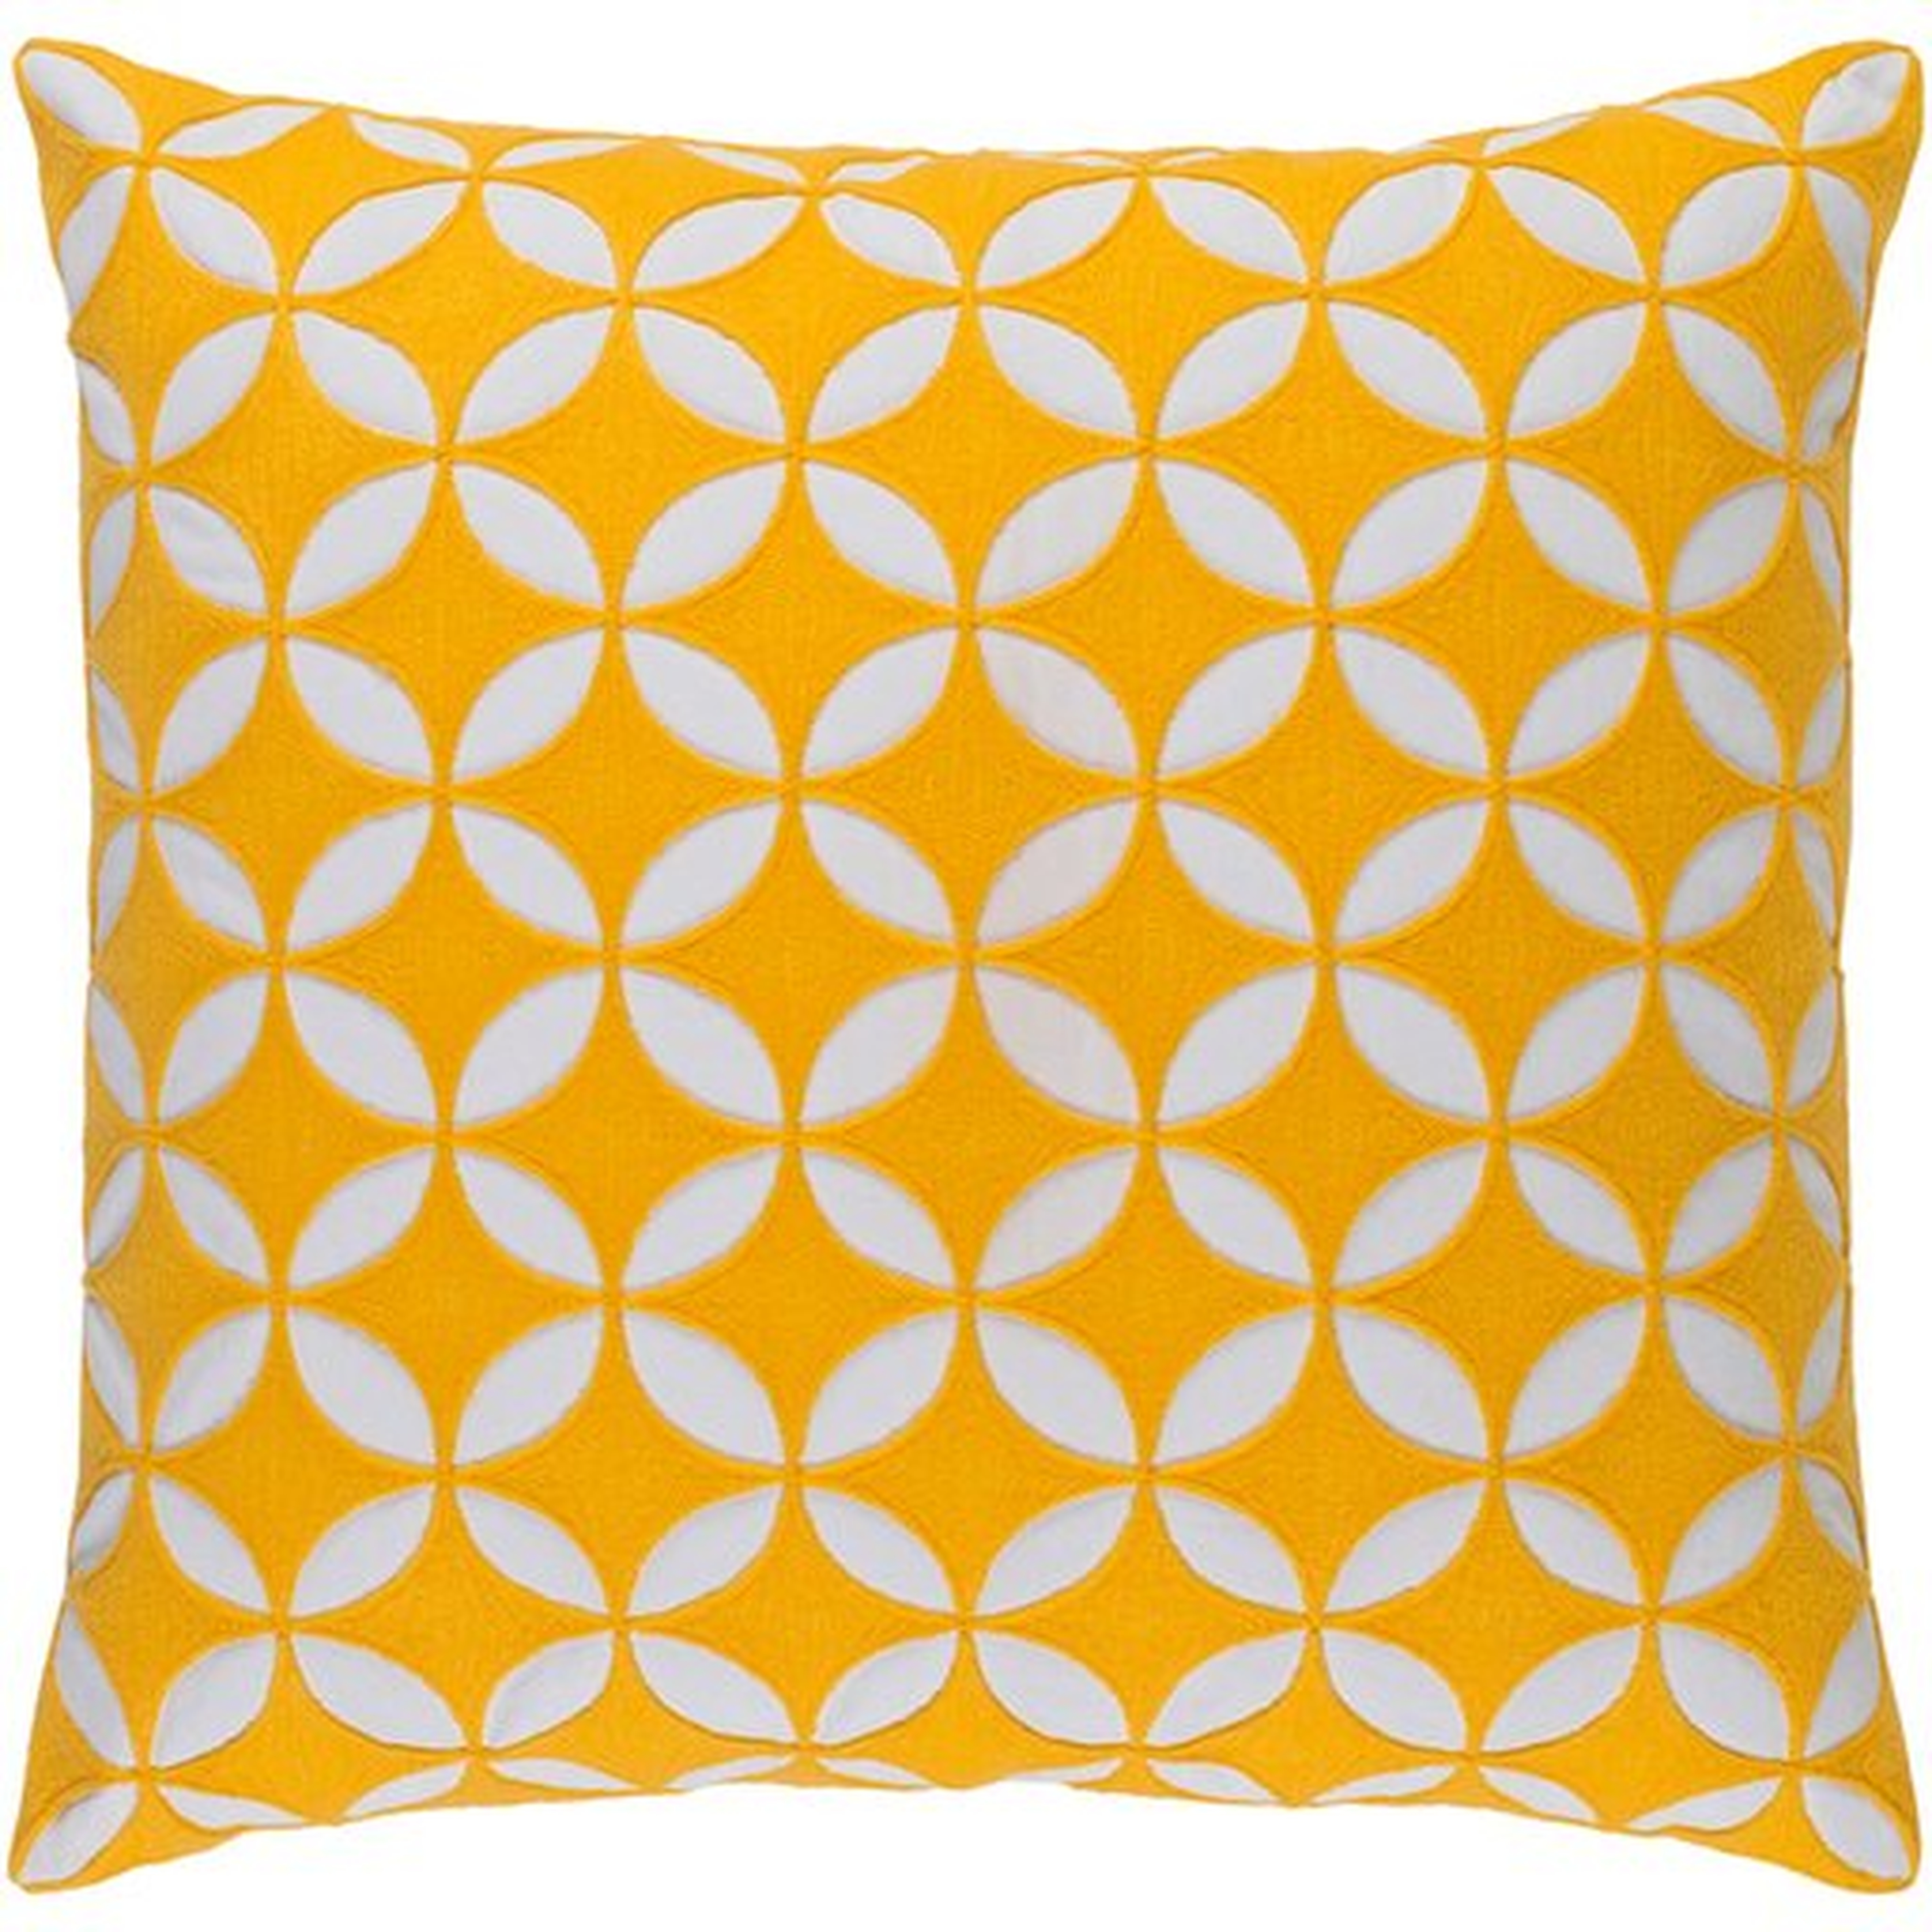 Perimeter Throw Pillow, 22" x 22", with poly insert - Surya